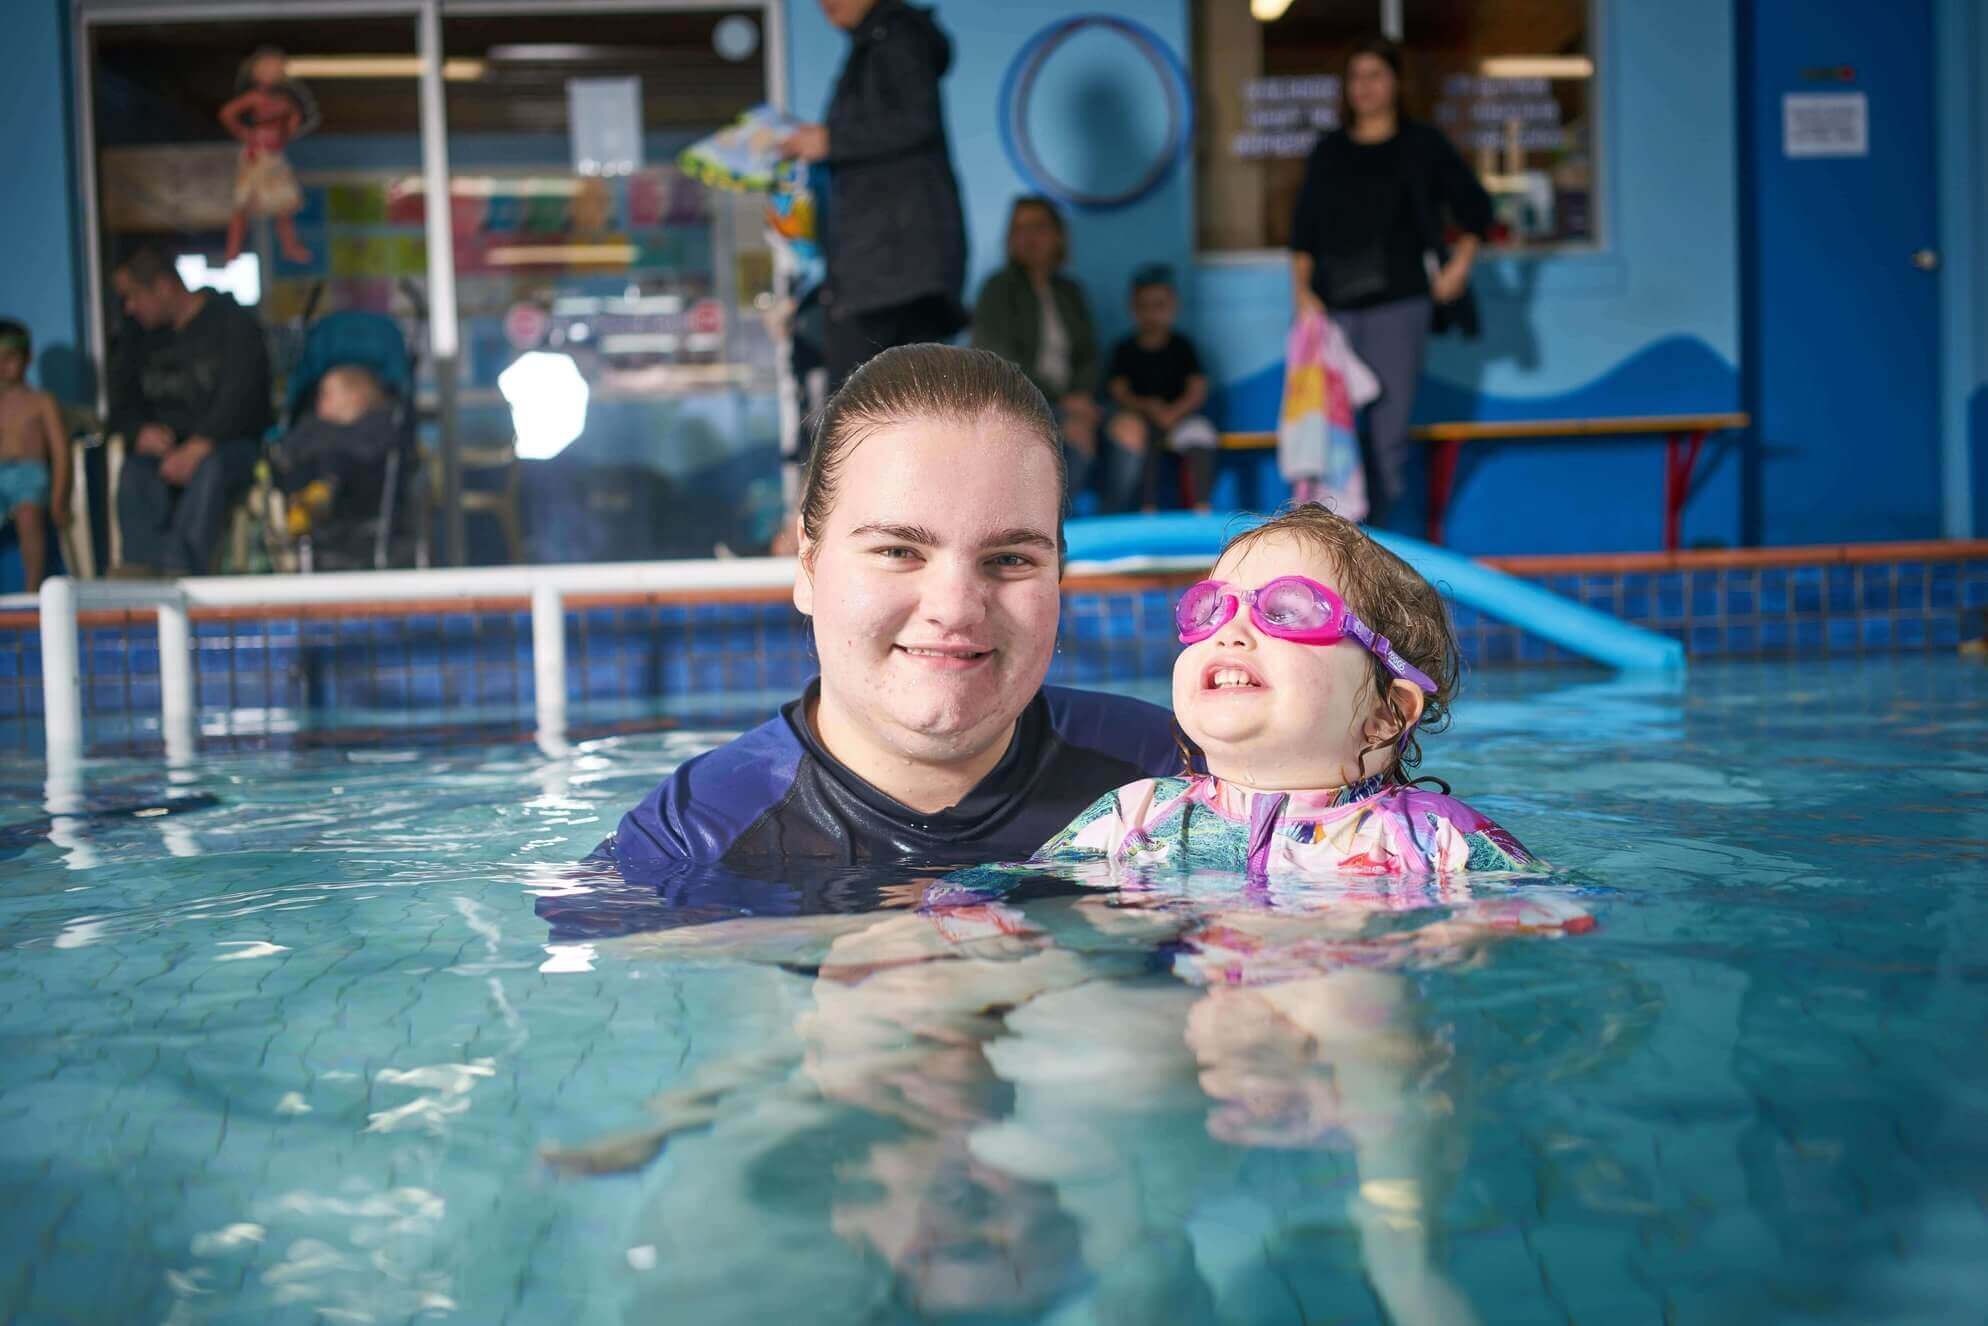 Maddy in a pool teaching a child